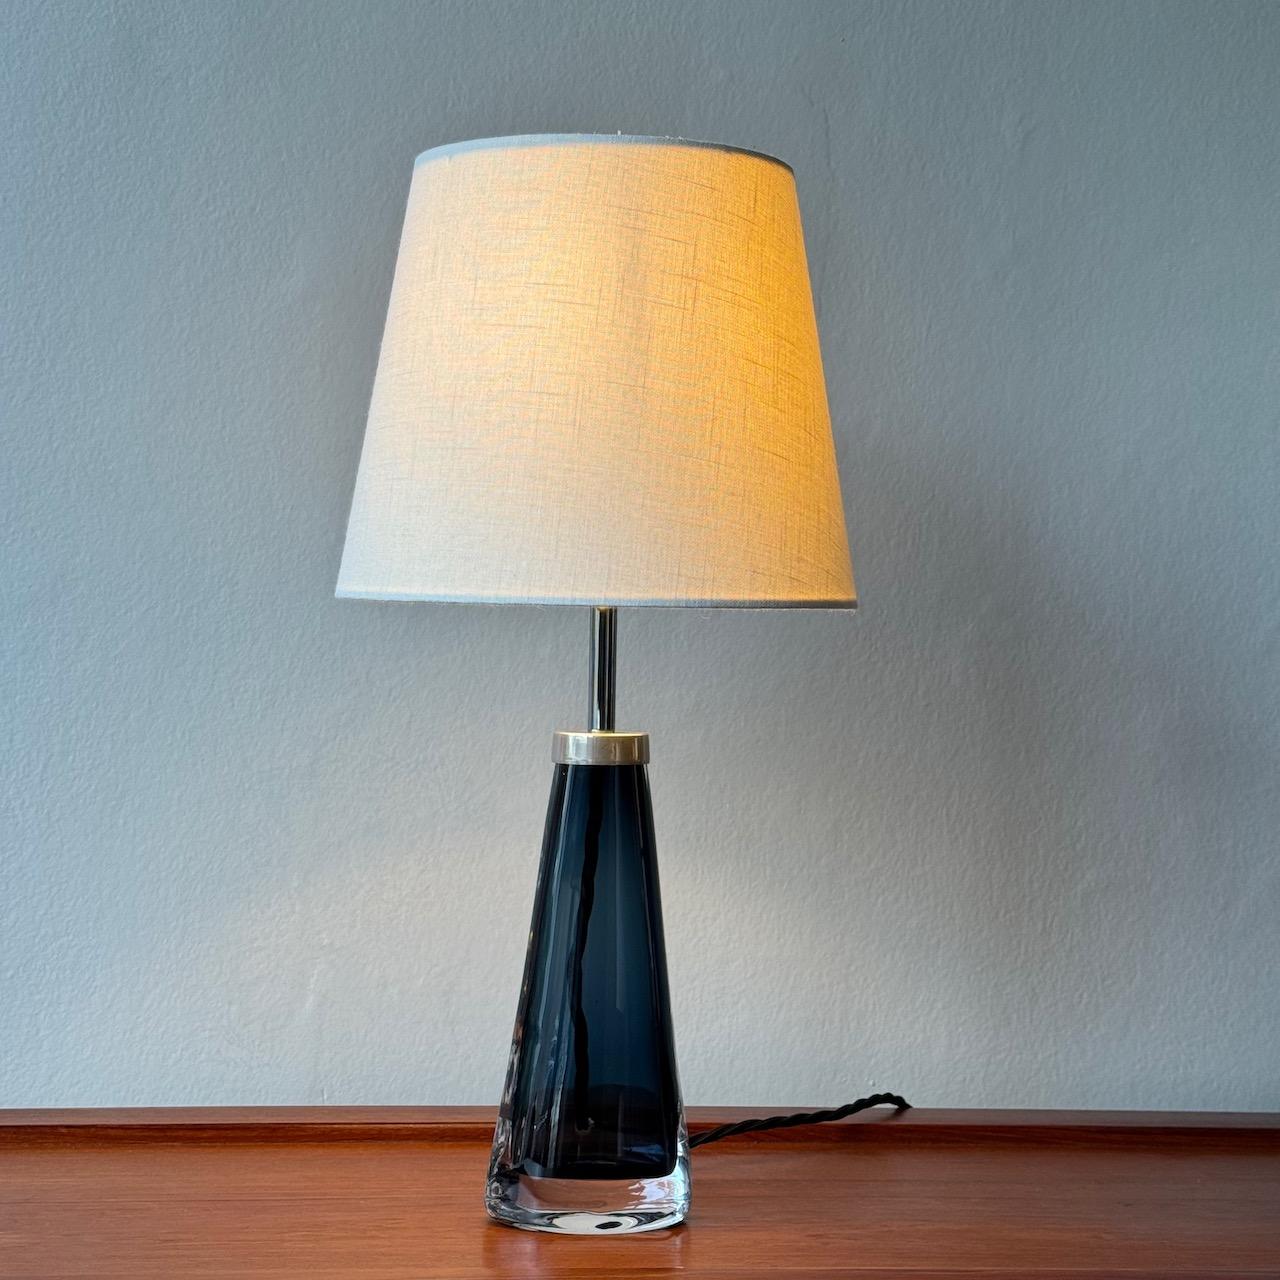 A Pair of Glass Table Lamps, Carl Fagerlund, Orrefors Sweden, 1960s For Sale 3